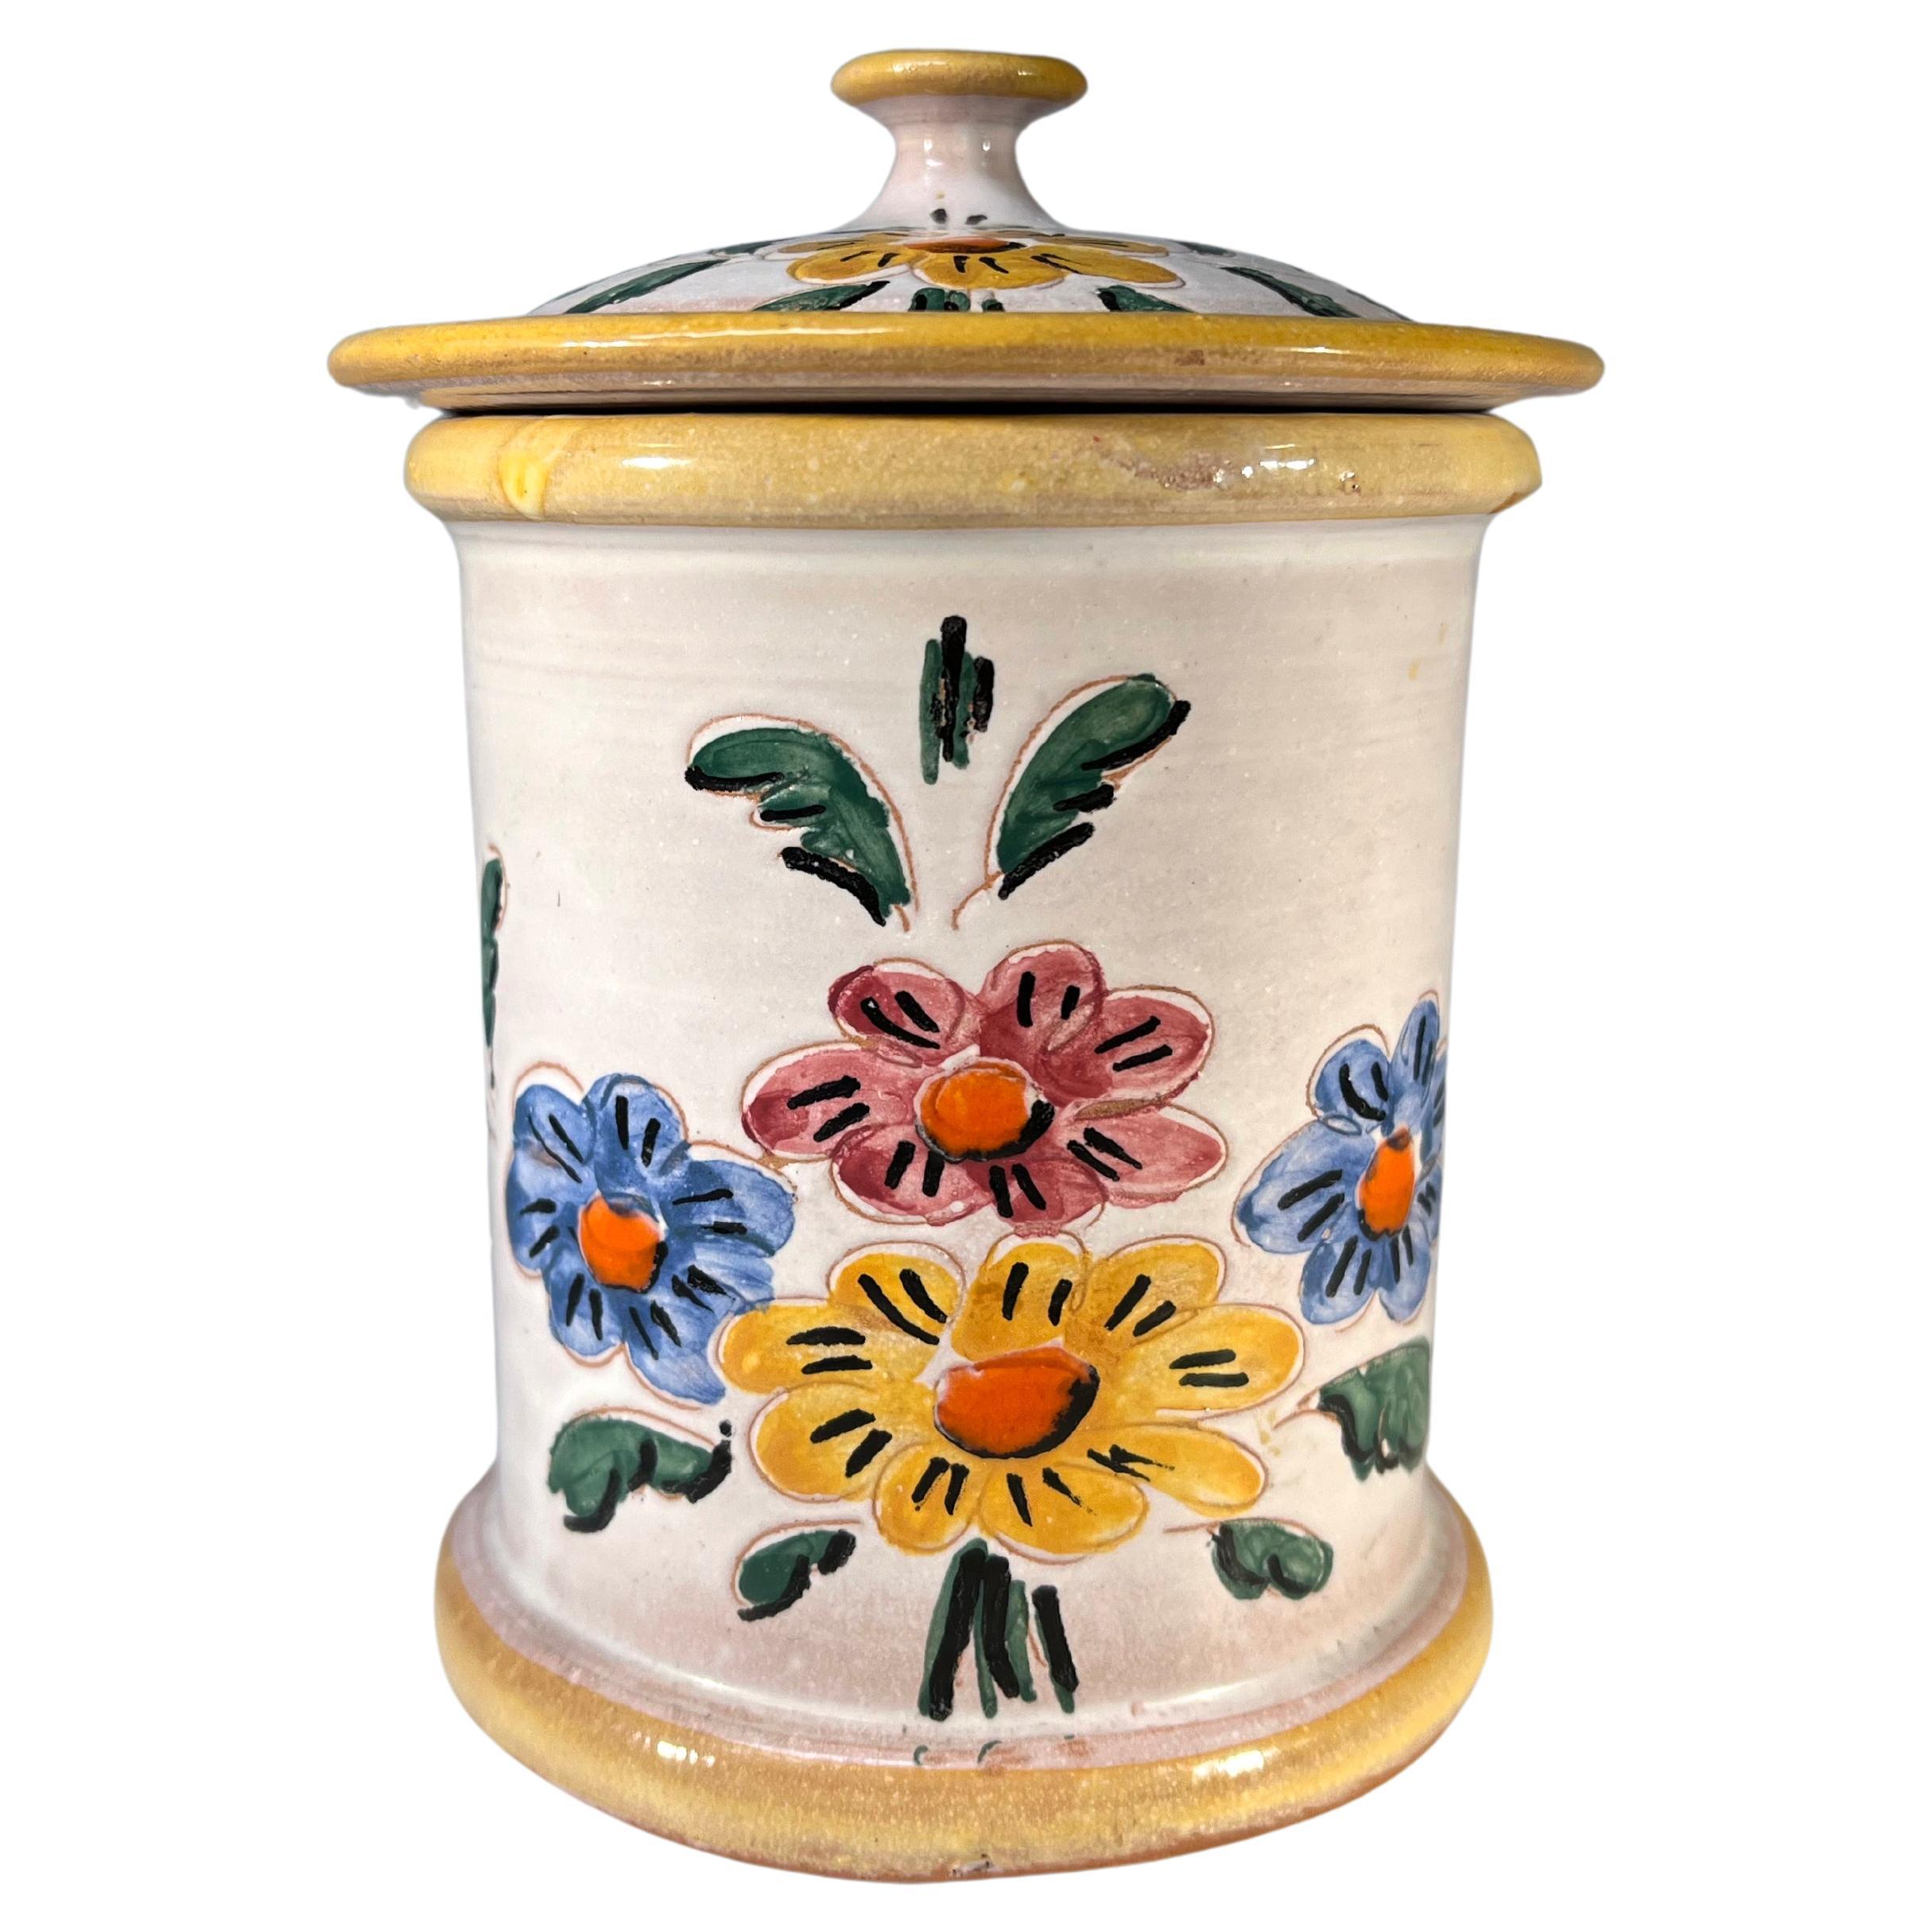 French Provincial, Floral Hand Painted Glazed Ceramic Tobacco Jar By Vallauris